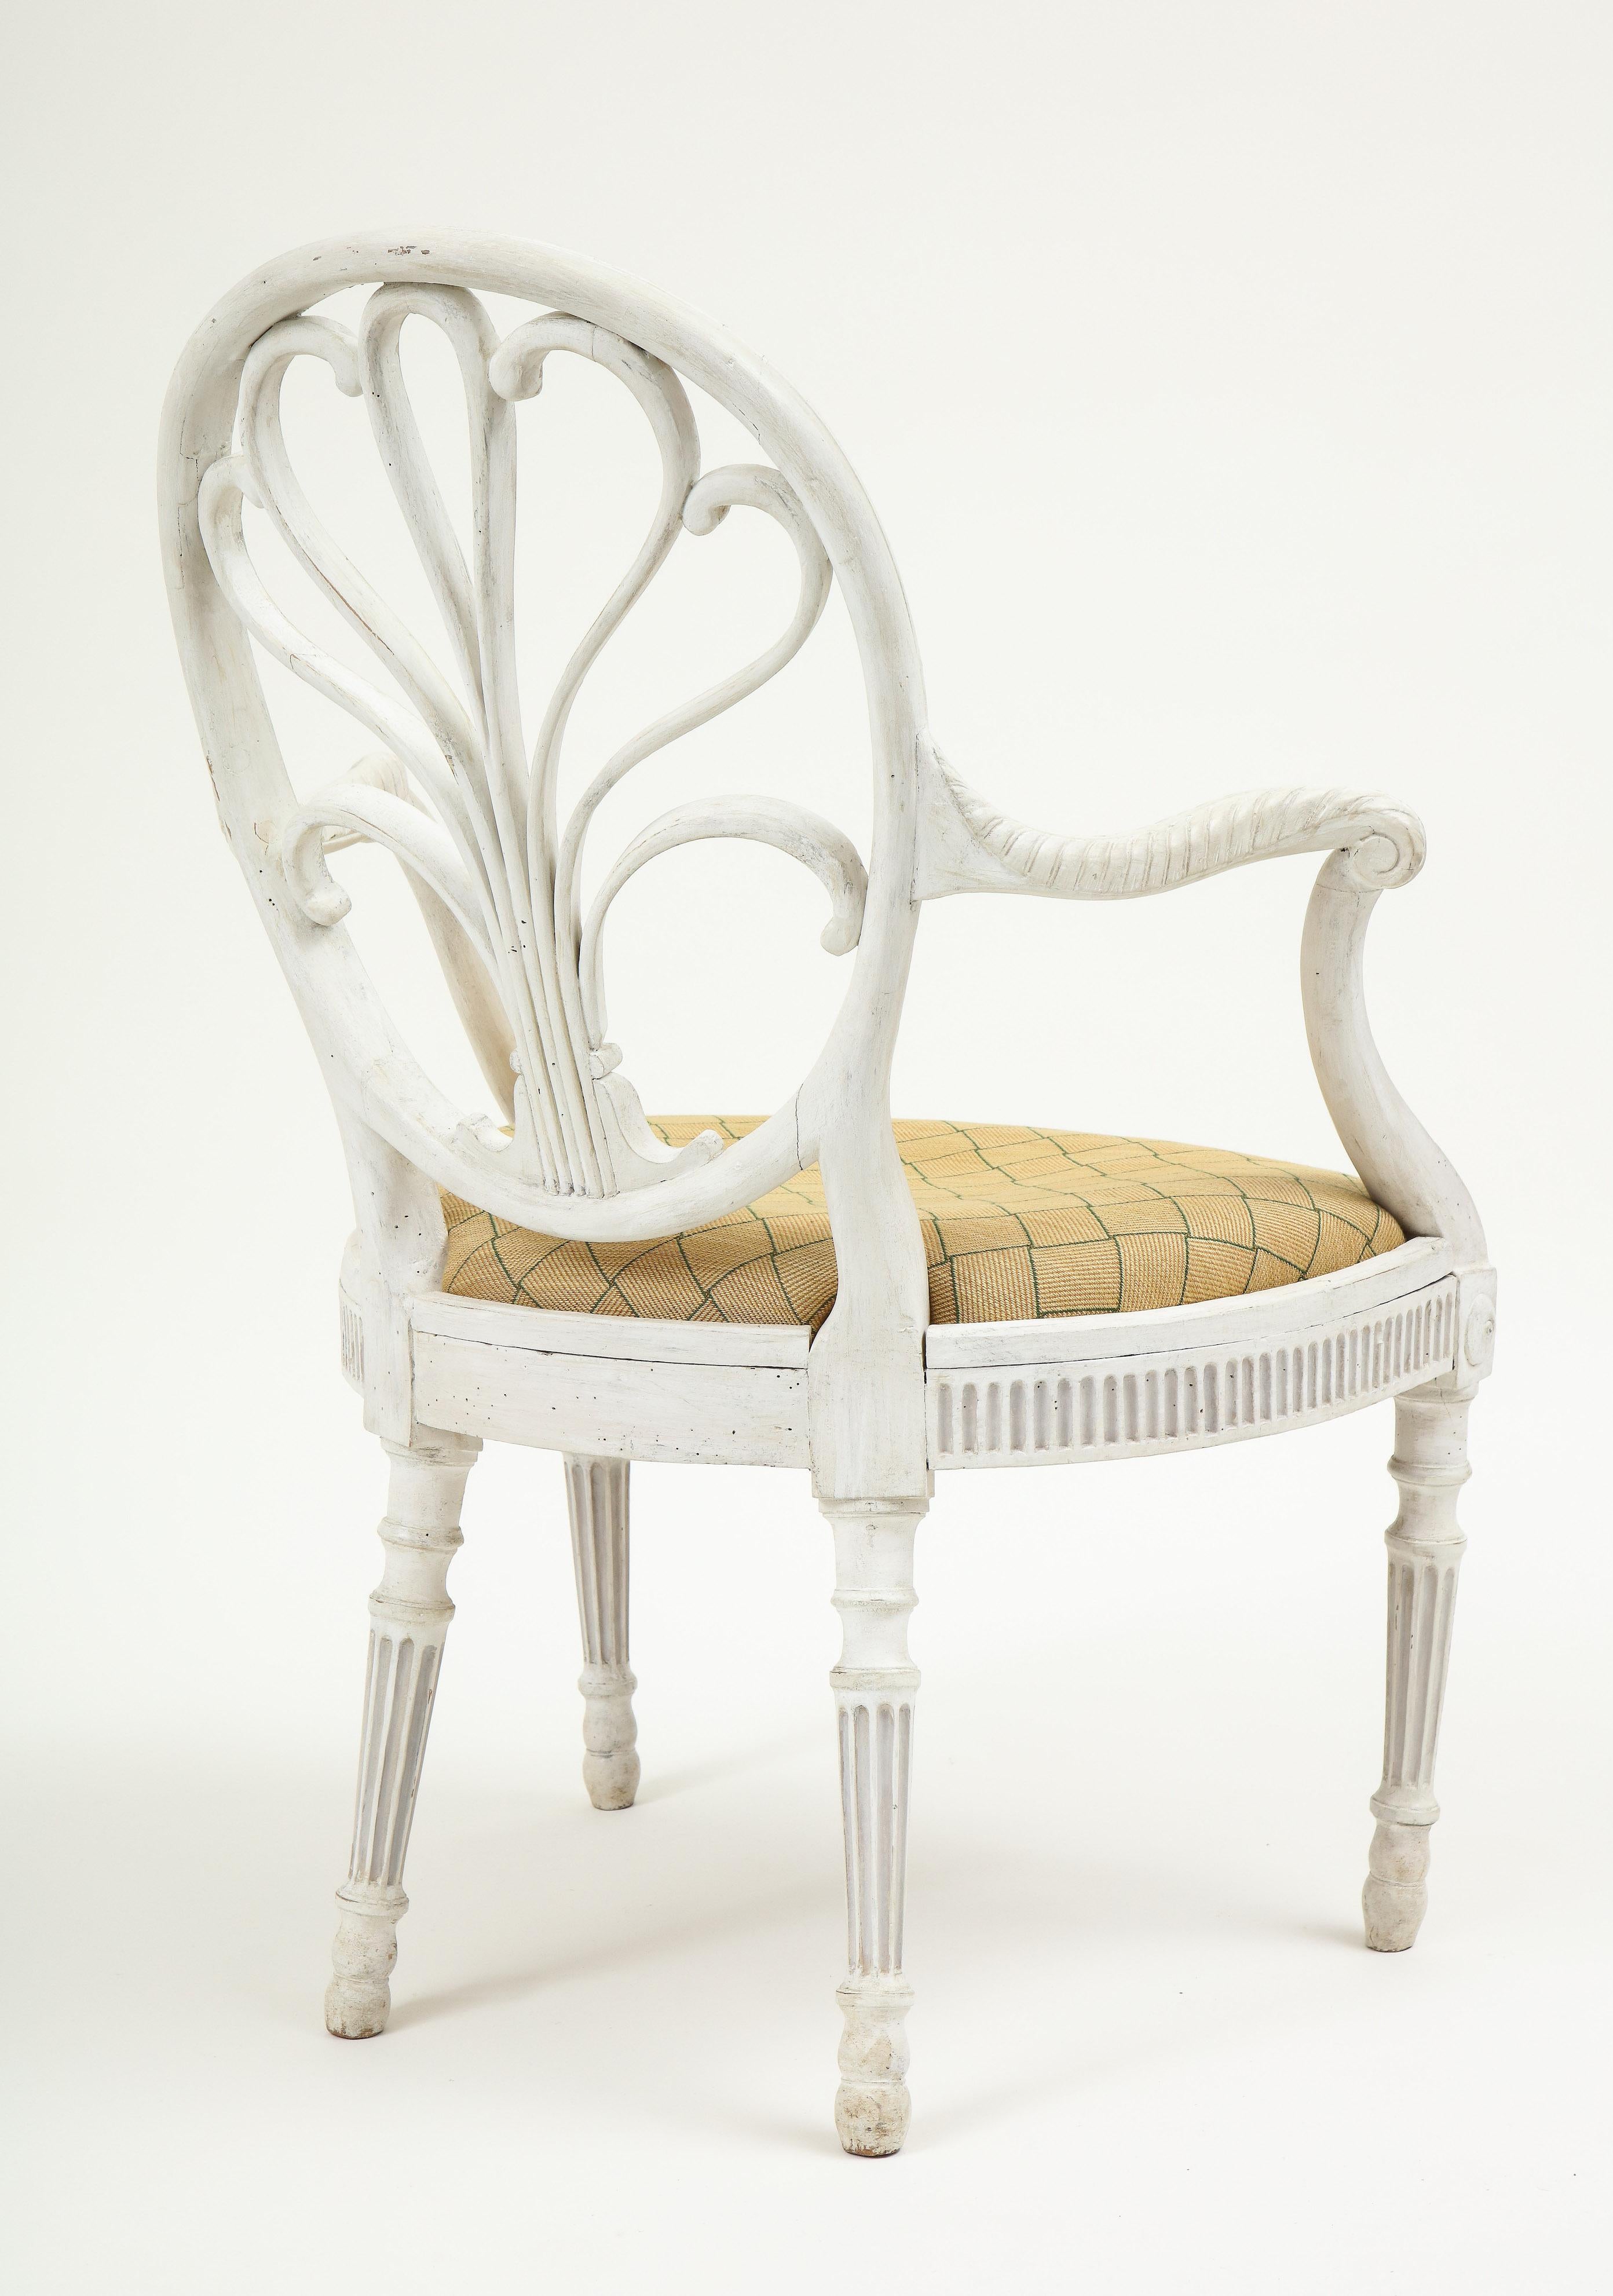 George III White-Painted Armchair Attributed to Gillows 1